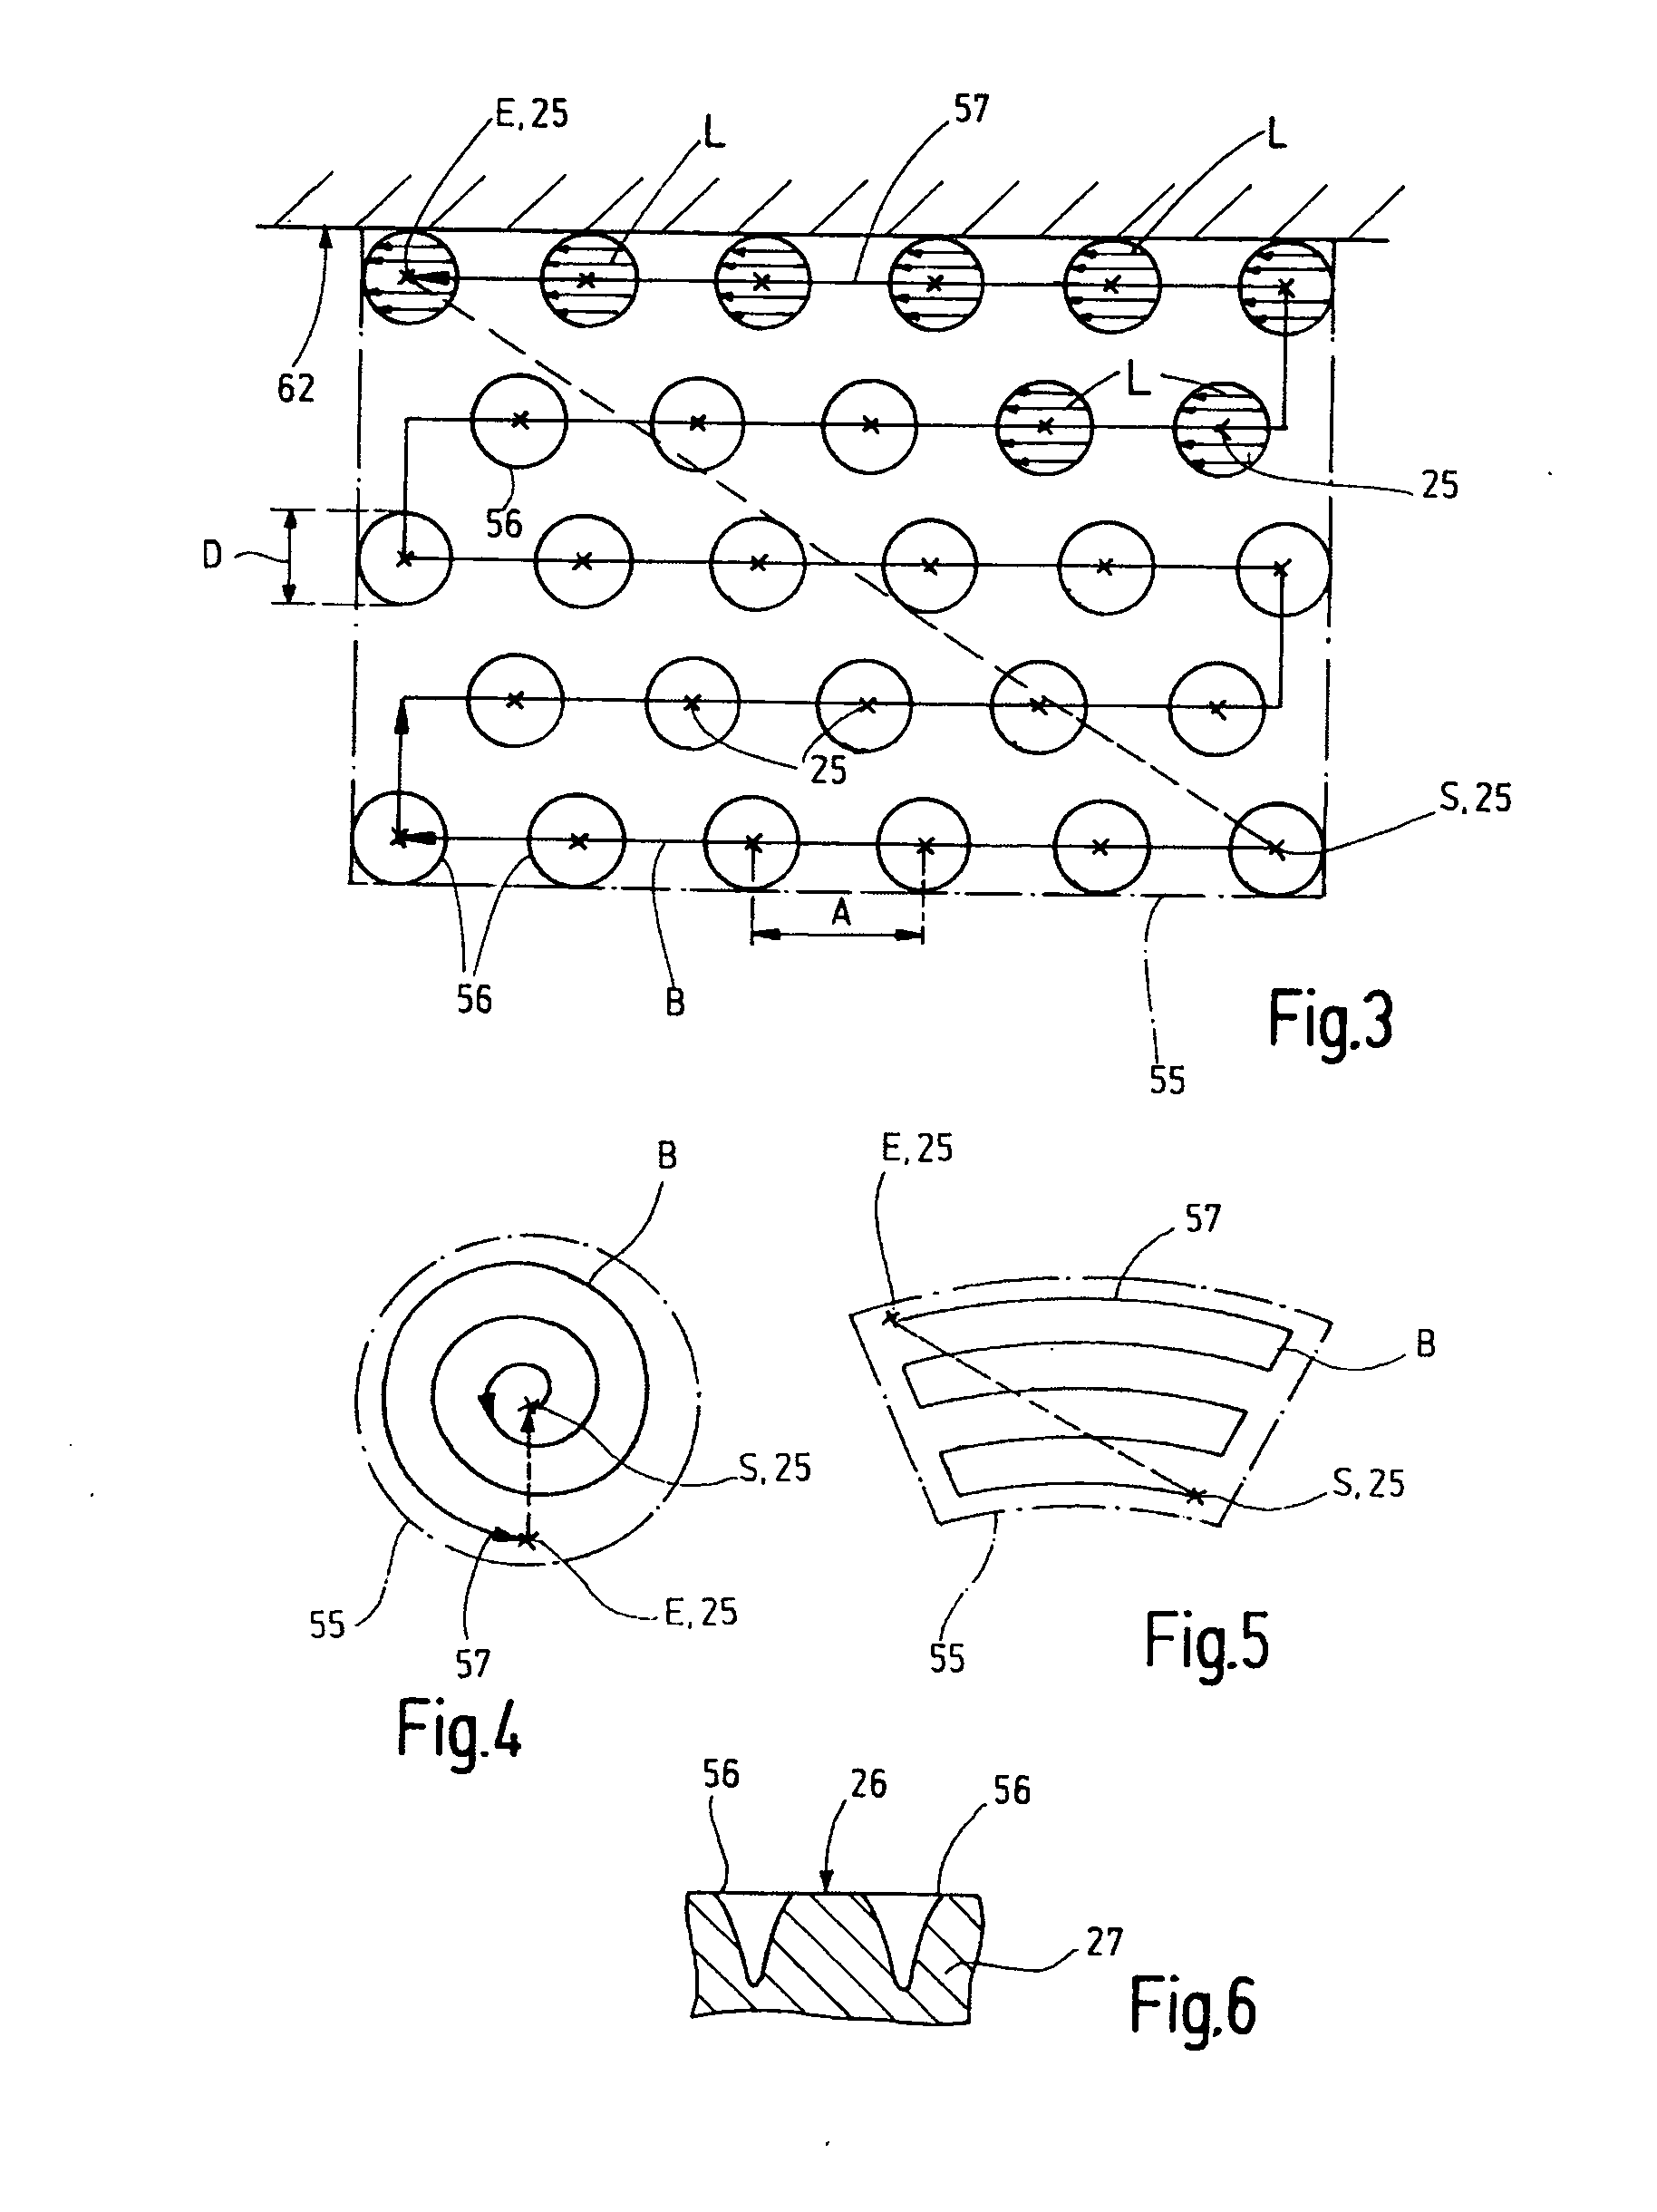 Laser machining apparatus and method for forming a surface on an unifinished product